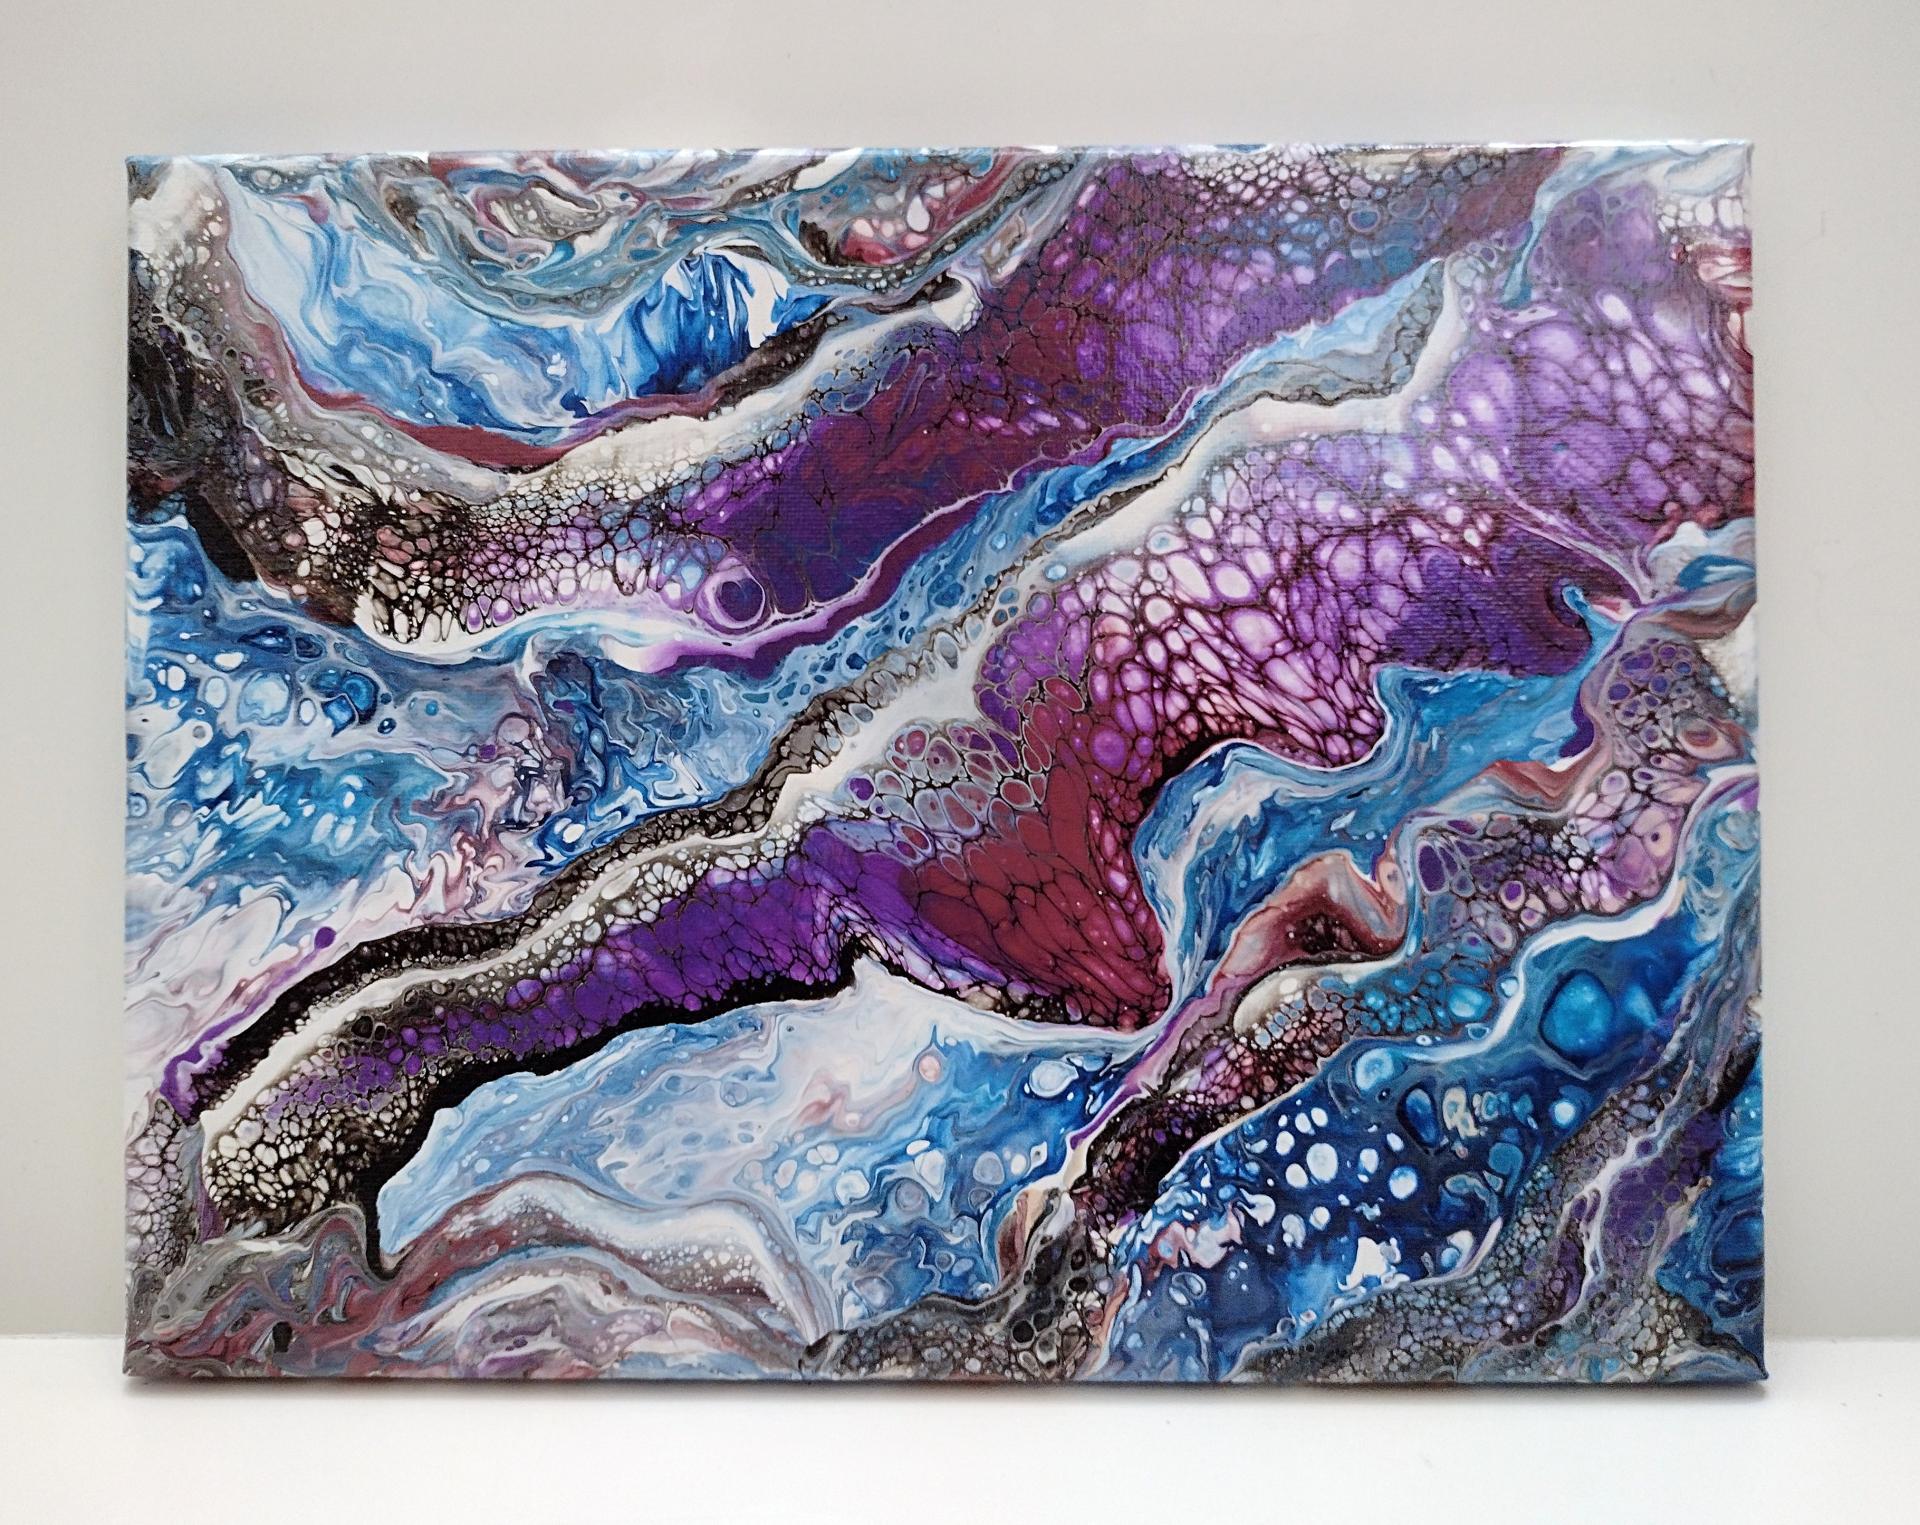 Purple and Blue Abstract Original Acrylic Pour Painting, 9" x 12", Fluid Art Painting